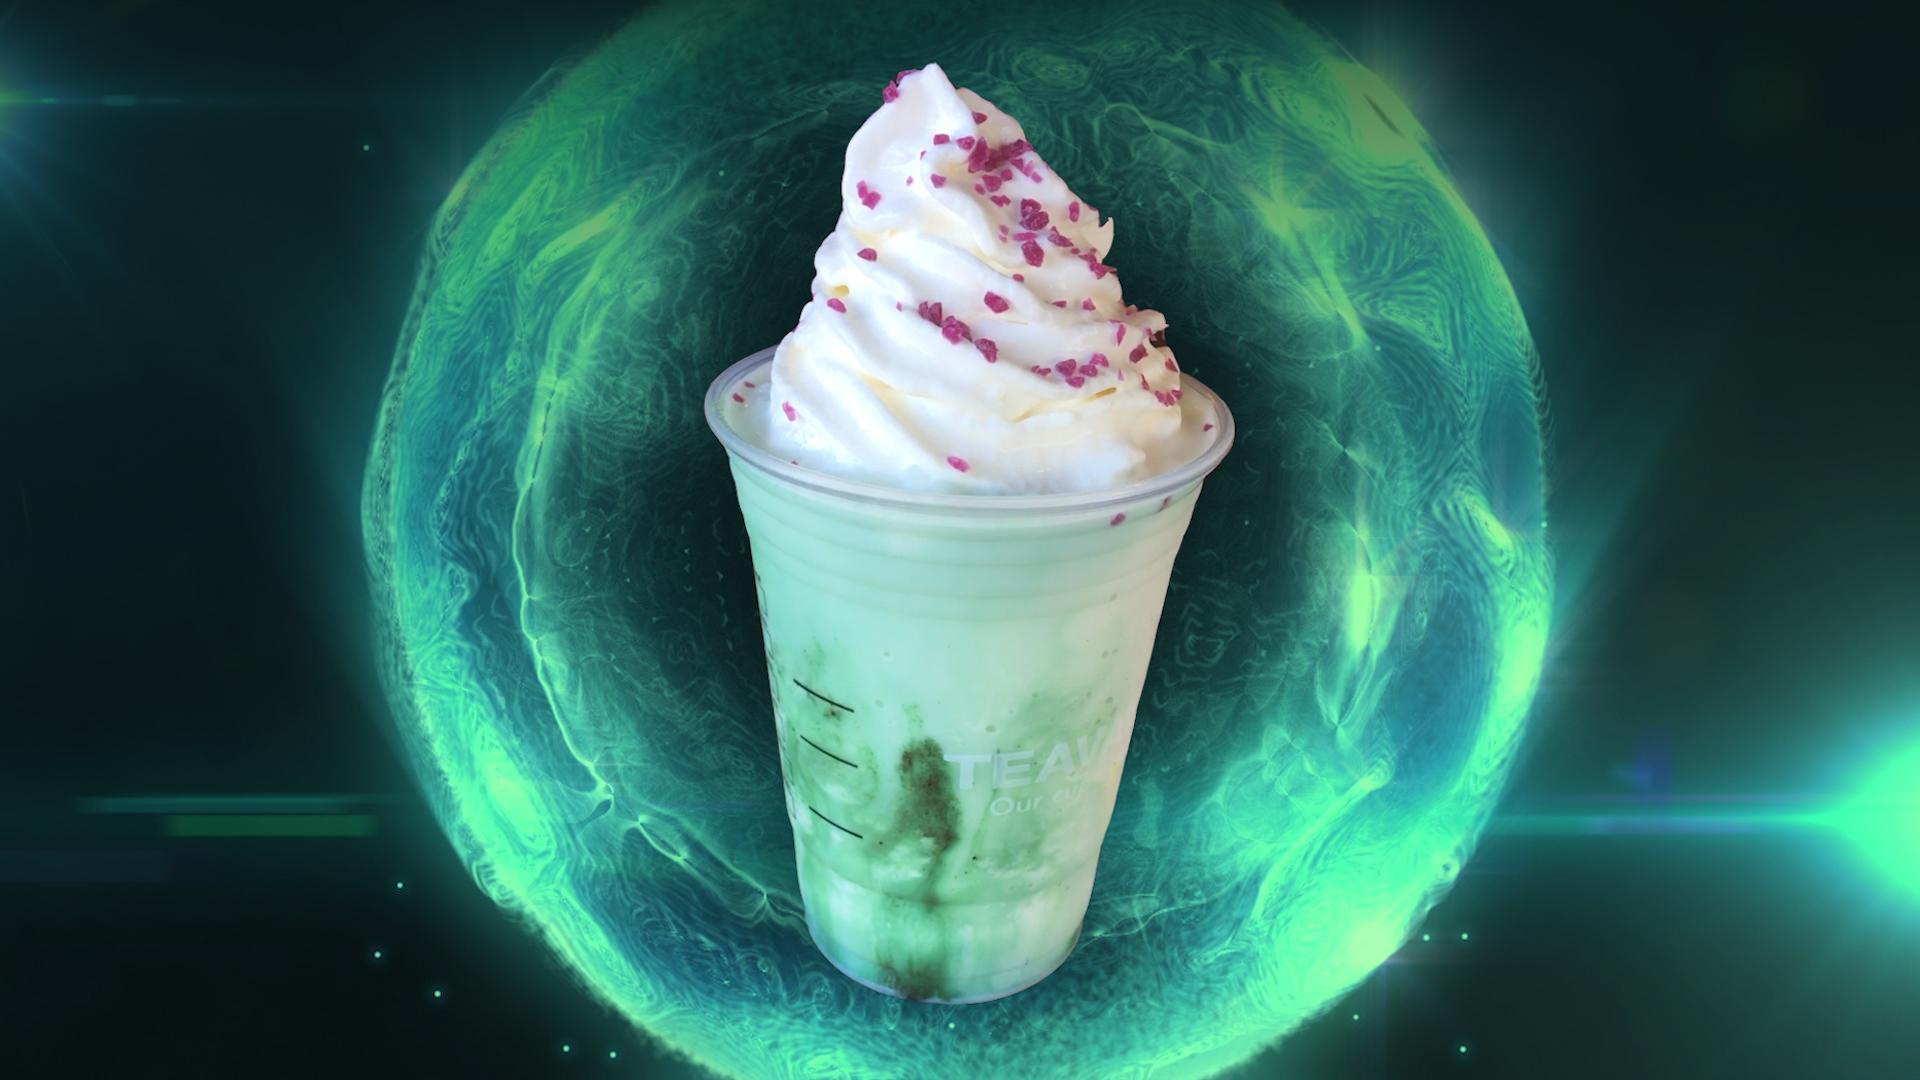 Starbucks Releases Crystal Ball Frappuccino